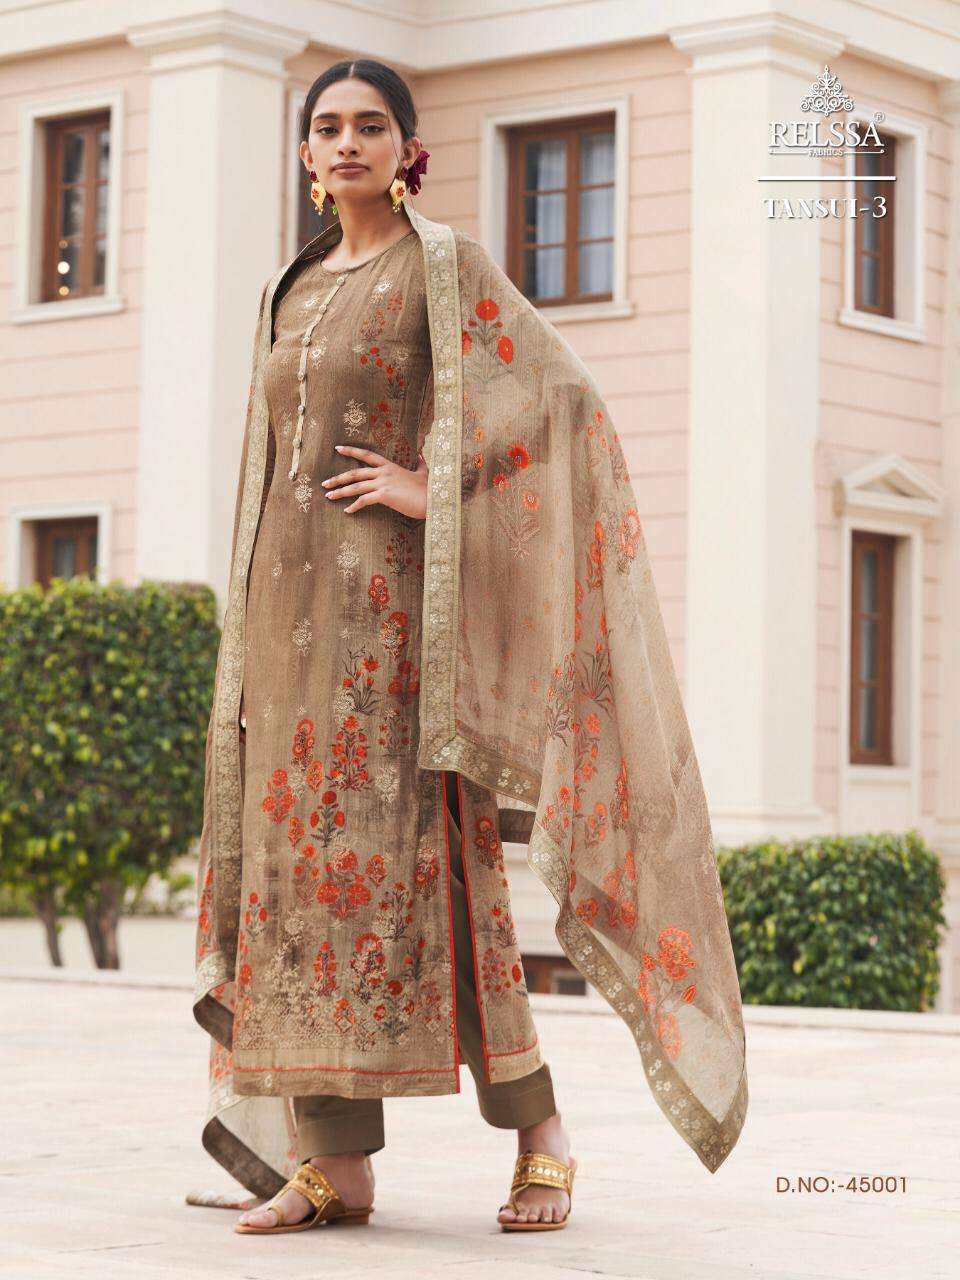 TANSUI VOL-3 BY RELSSA FABRICS 45001 TO 45008 SERIES BEAUTIFUL SUITS STYLISH FANCY COLORFUL PARTY WEAR & OCCASIONAL WEAR TANSUI SILK DIGITAL PRINT DRESSES AT WHOLESALE PRICE